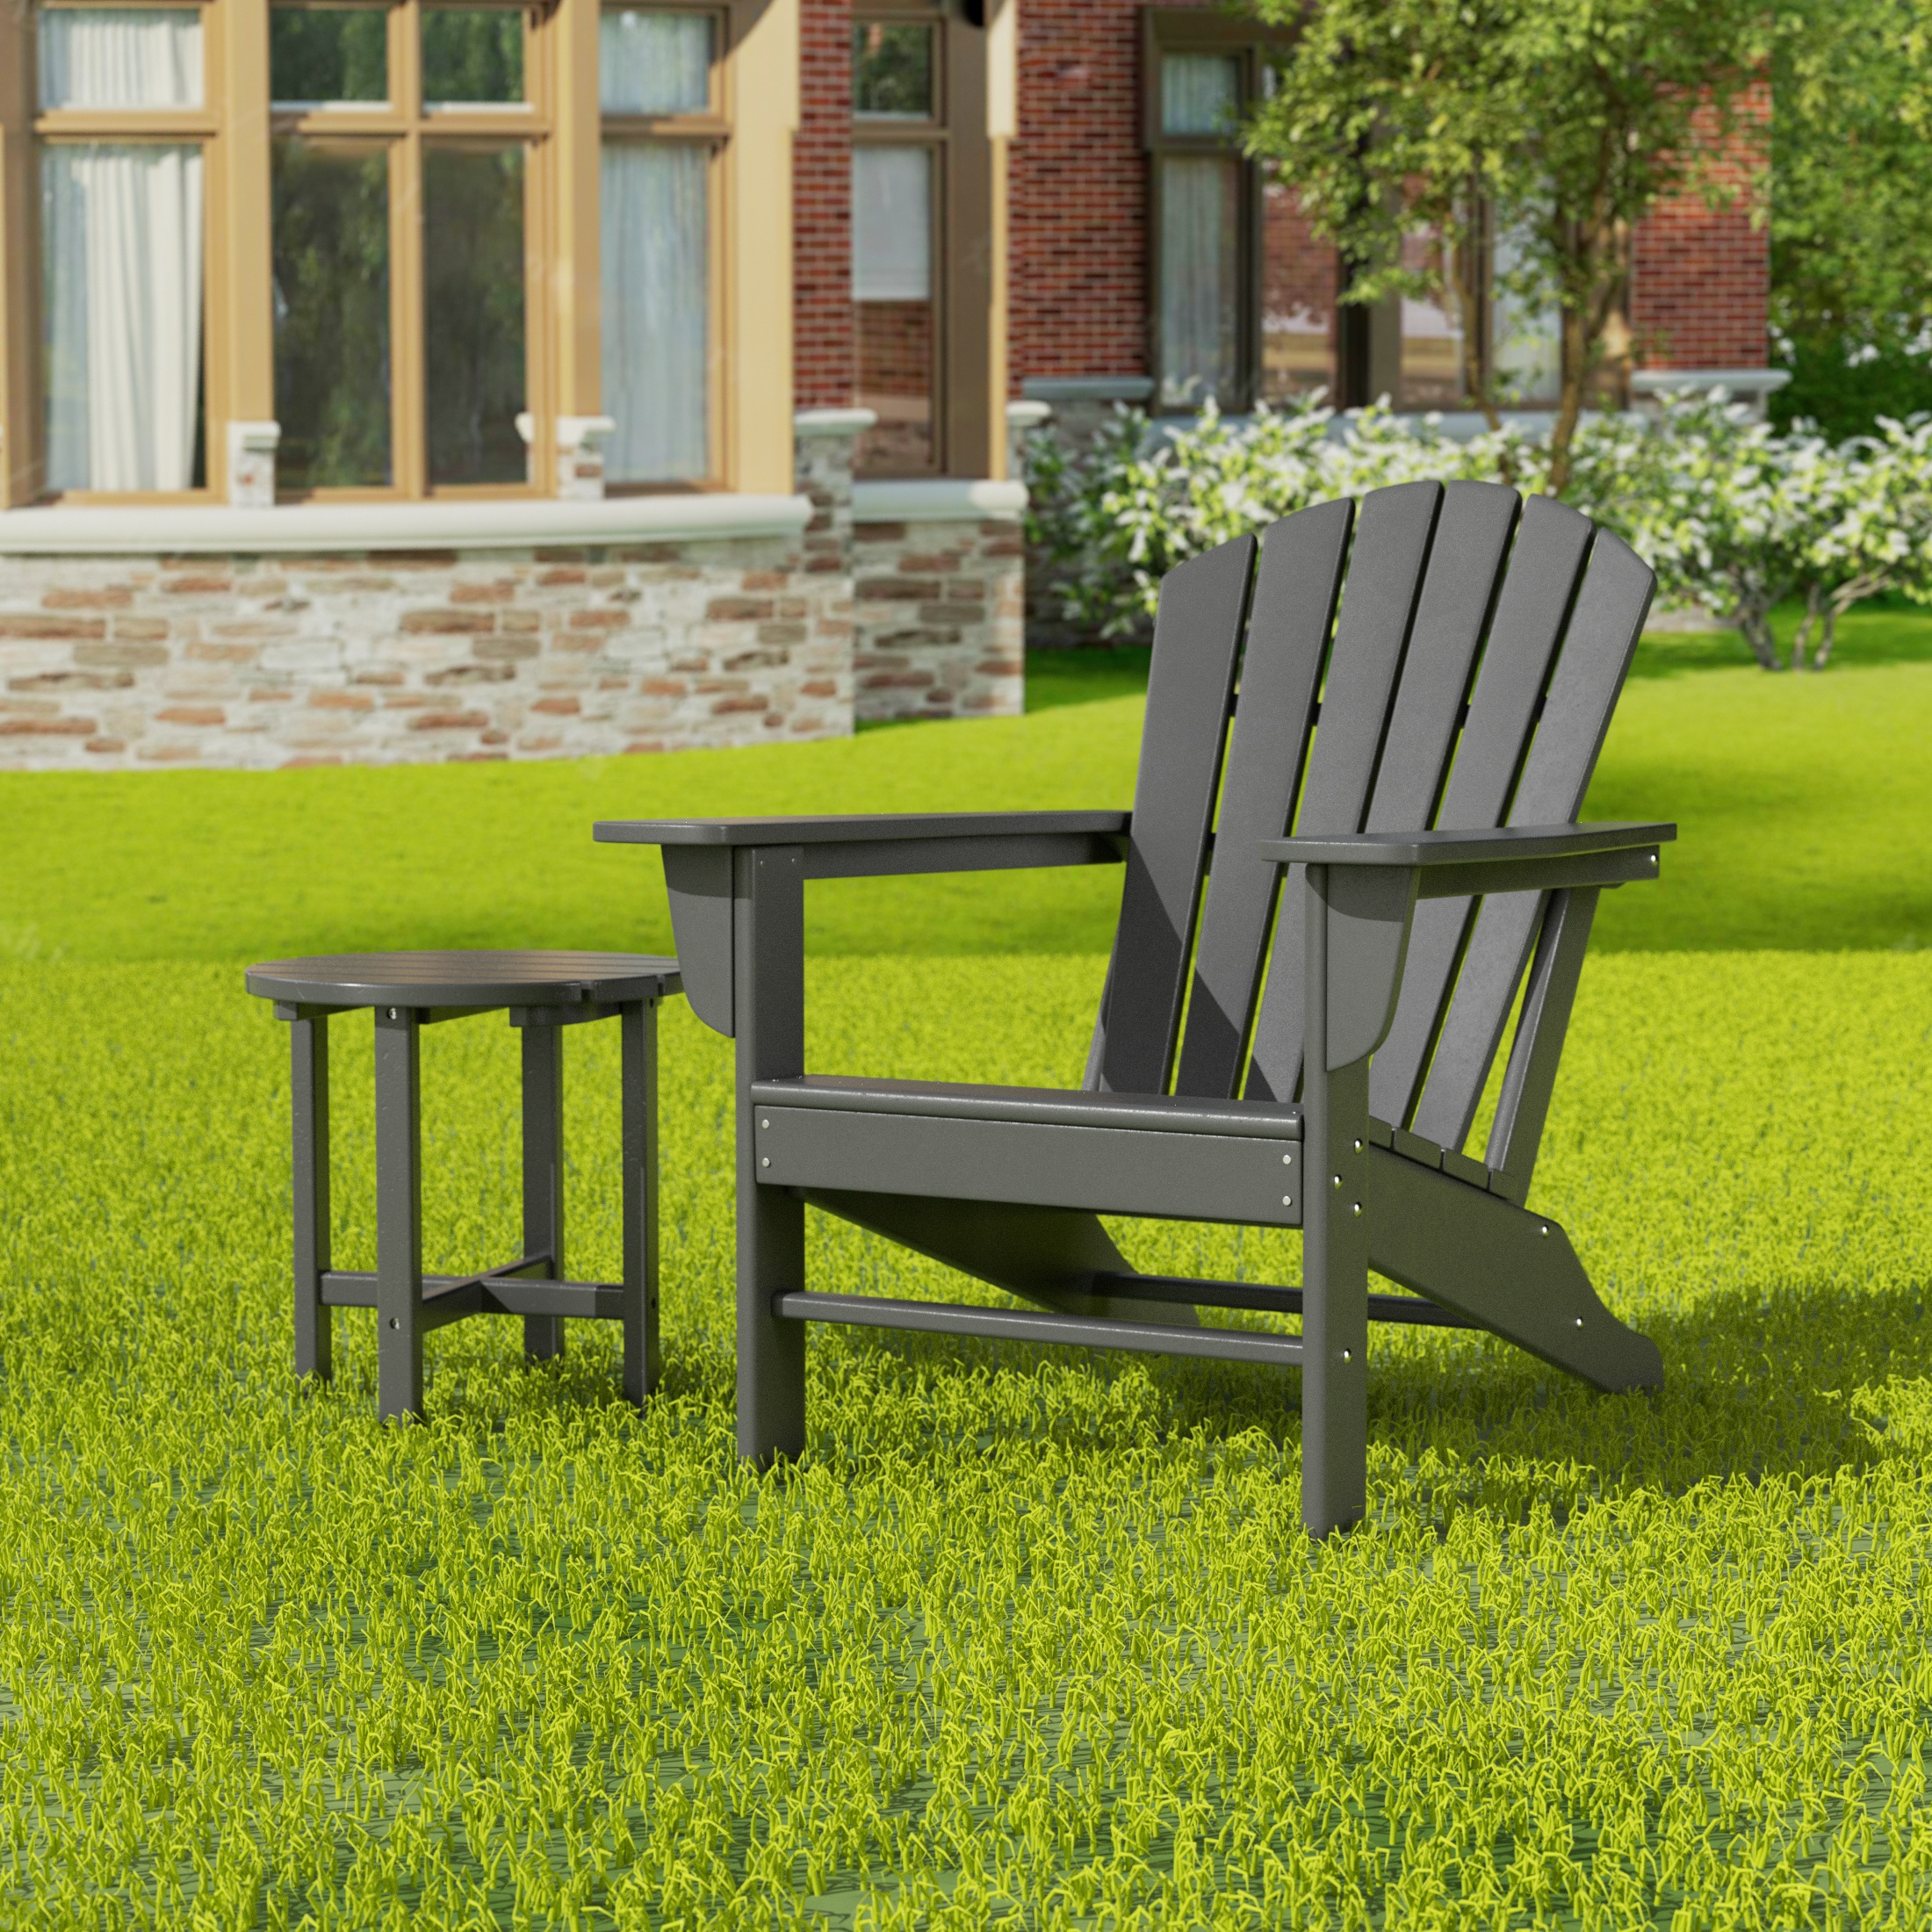 Westin Outdoor with Side Table HDPE Plastic Adirondack Chair - Gray (Set of 2) - image 1 of 5